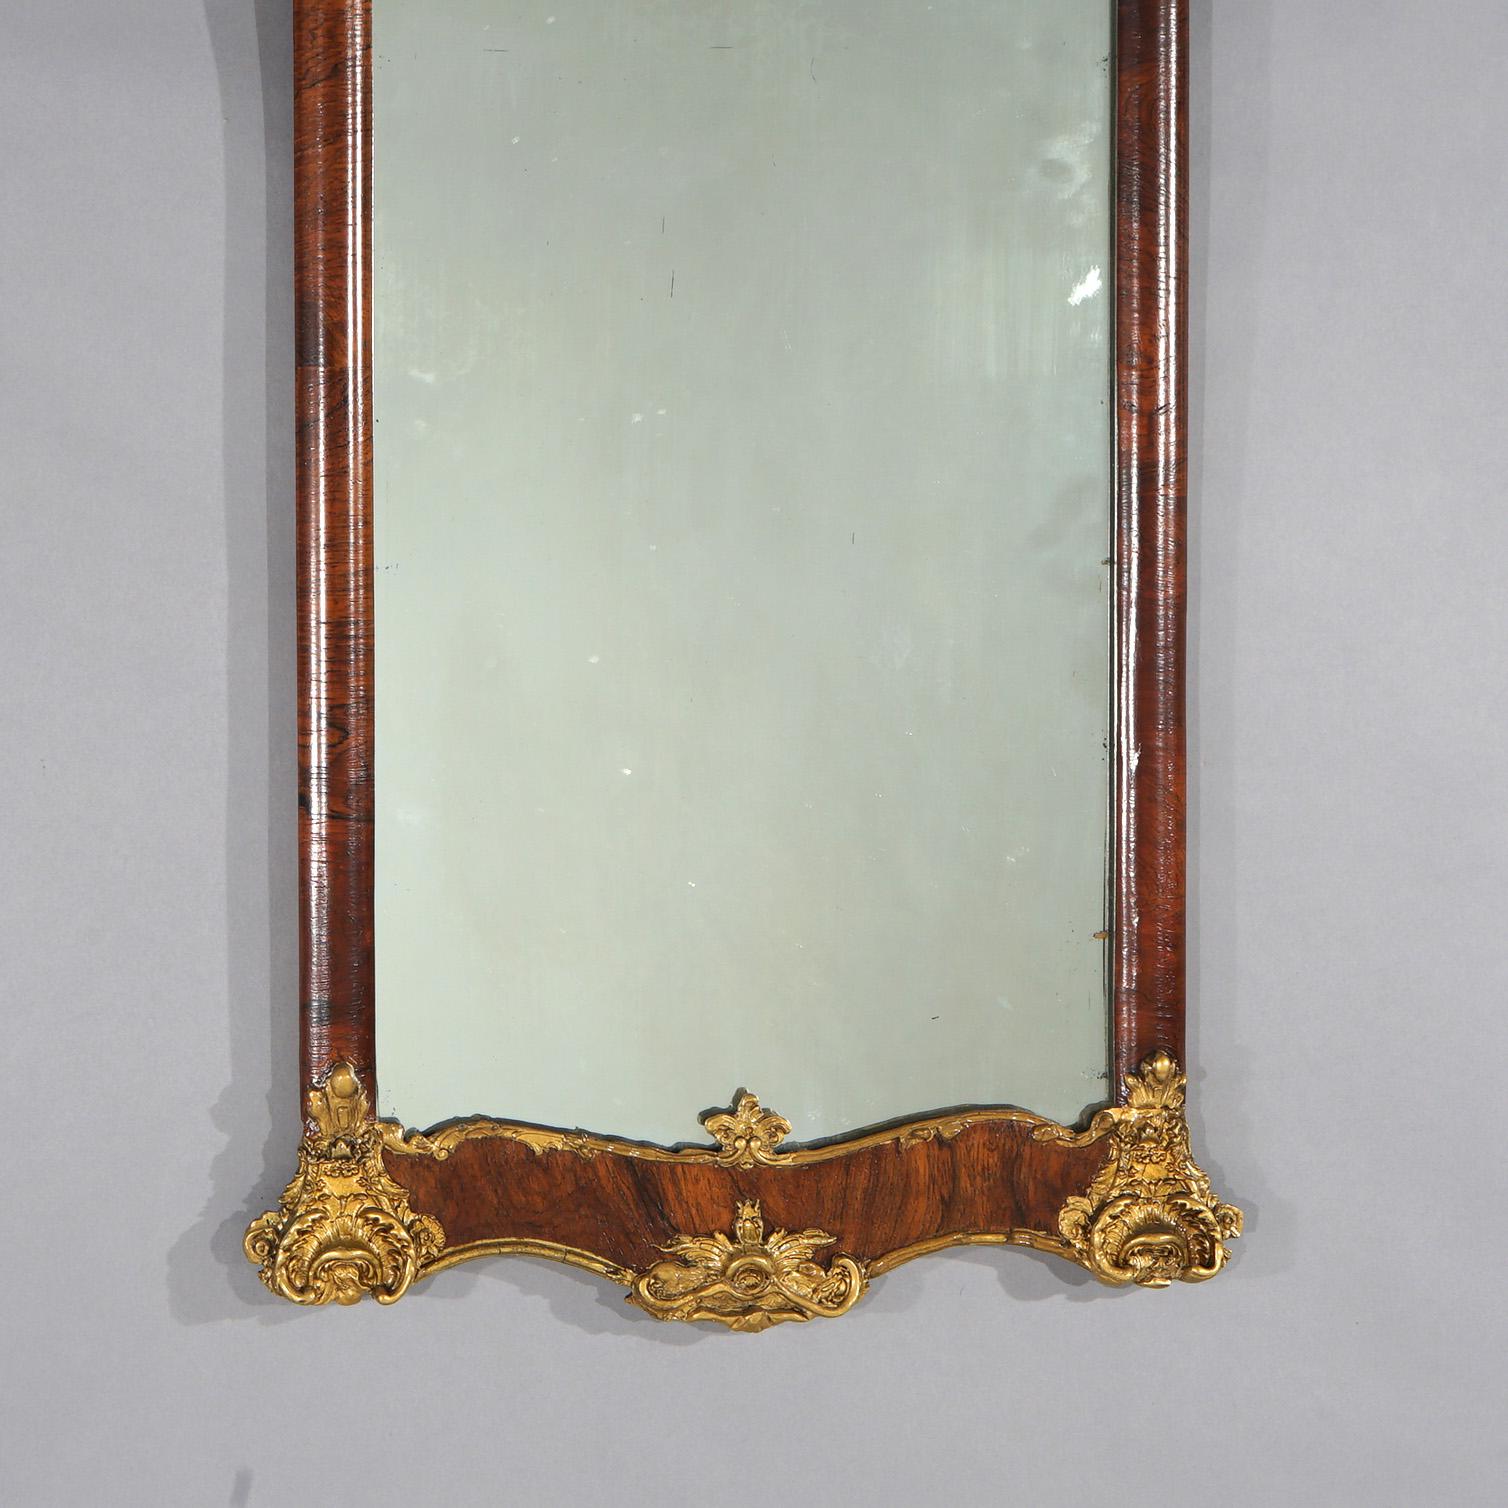 19th Century Antique Classical Gilt & Rosewood Trumeau Wall Mirror with Ballroom Scene, c1890